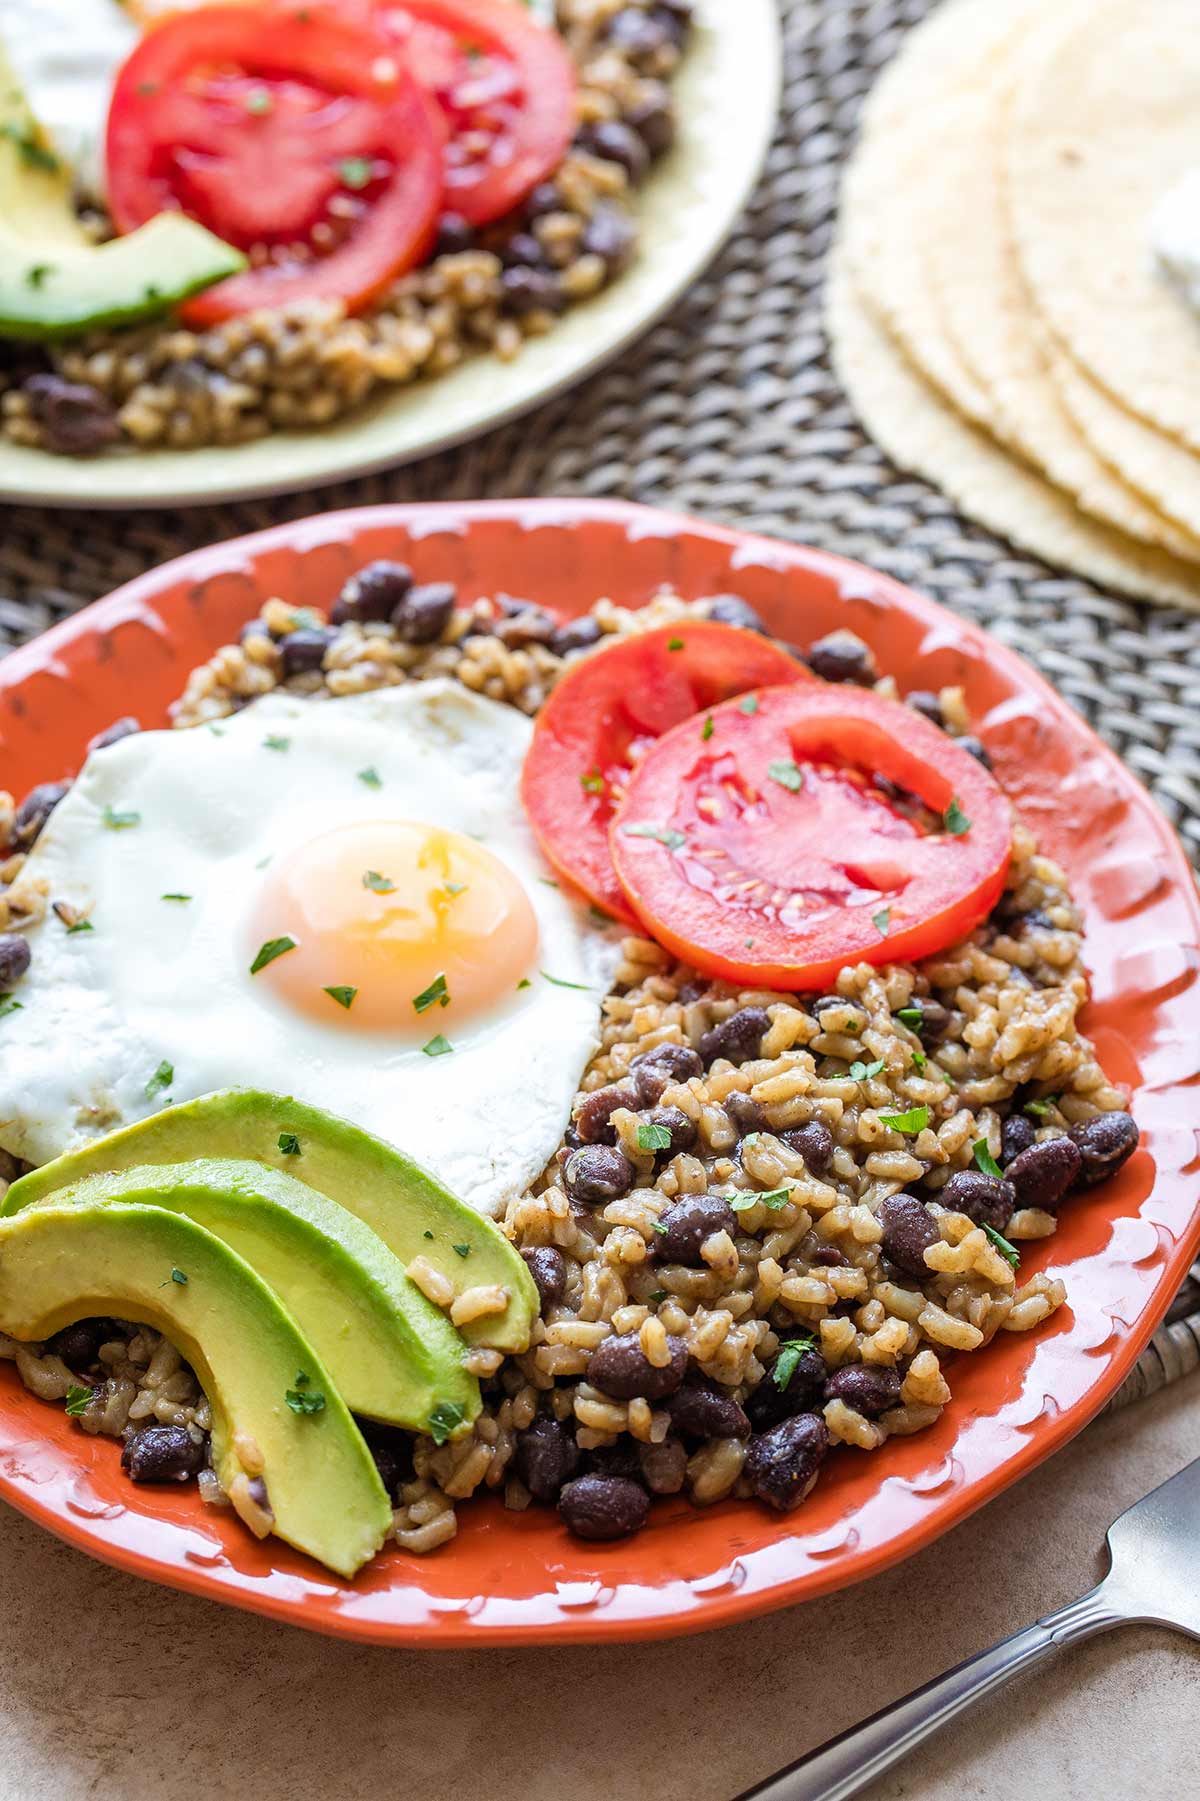 Rice and beans on orange plate with tomato, avocado and an egg nestled on top; second plateful in background.